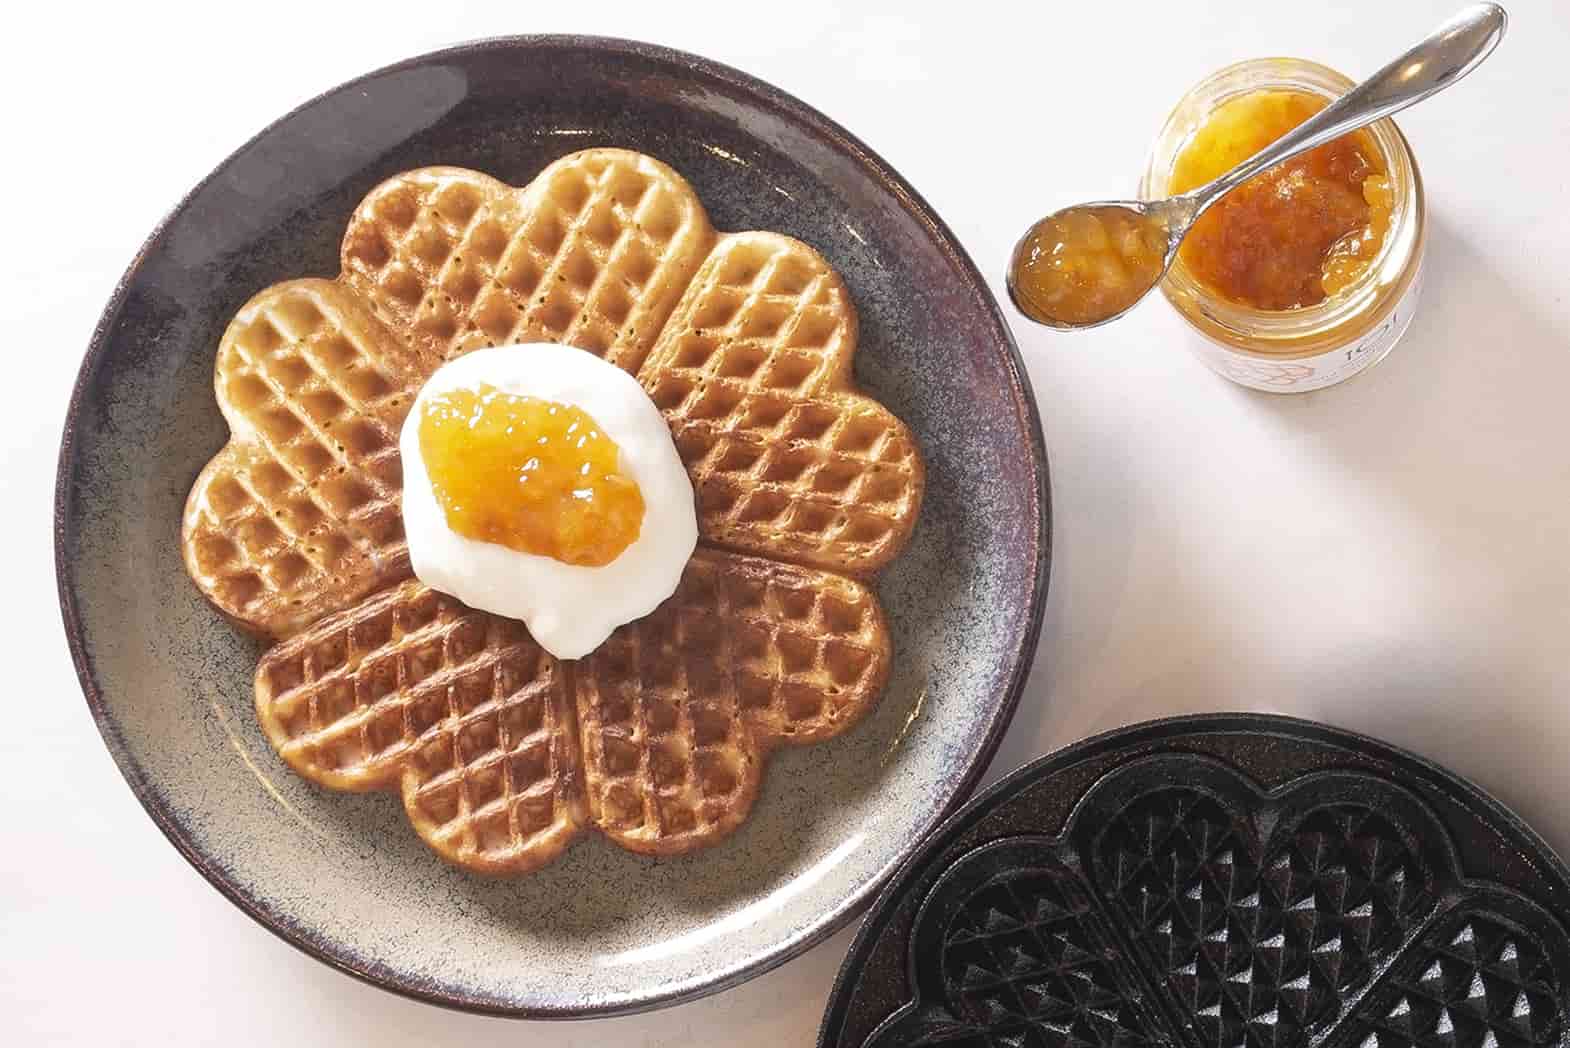 Swedish Waffles with Whipped Cream and Cloudberry Jam